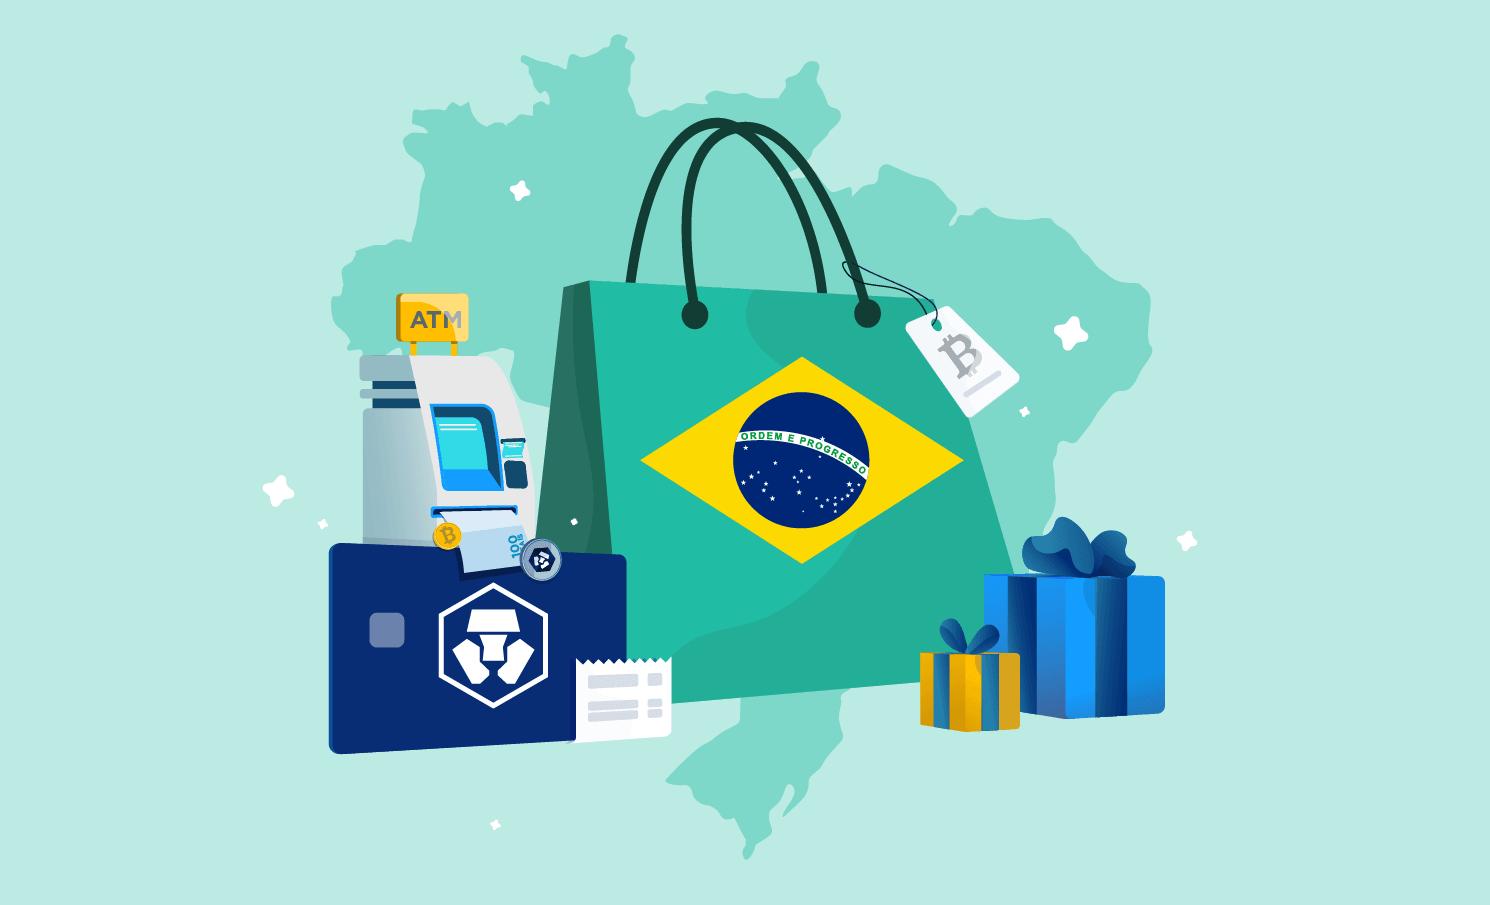 Brazilians Looking To Diversify Their Investment Portfolio With Crypto